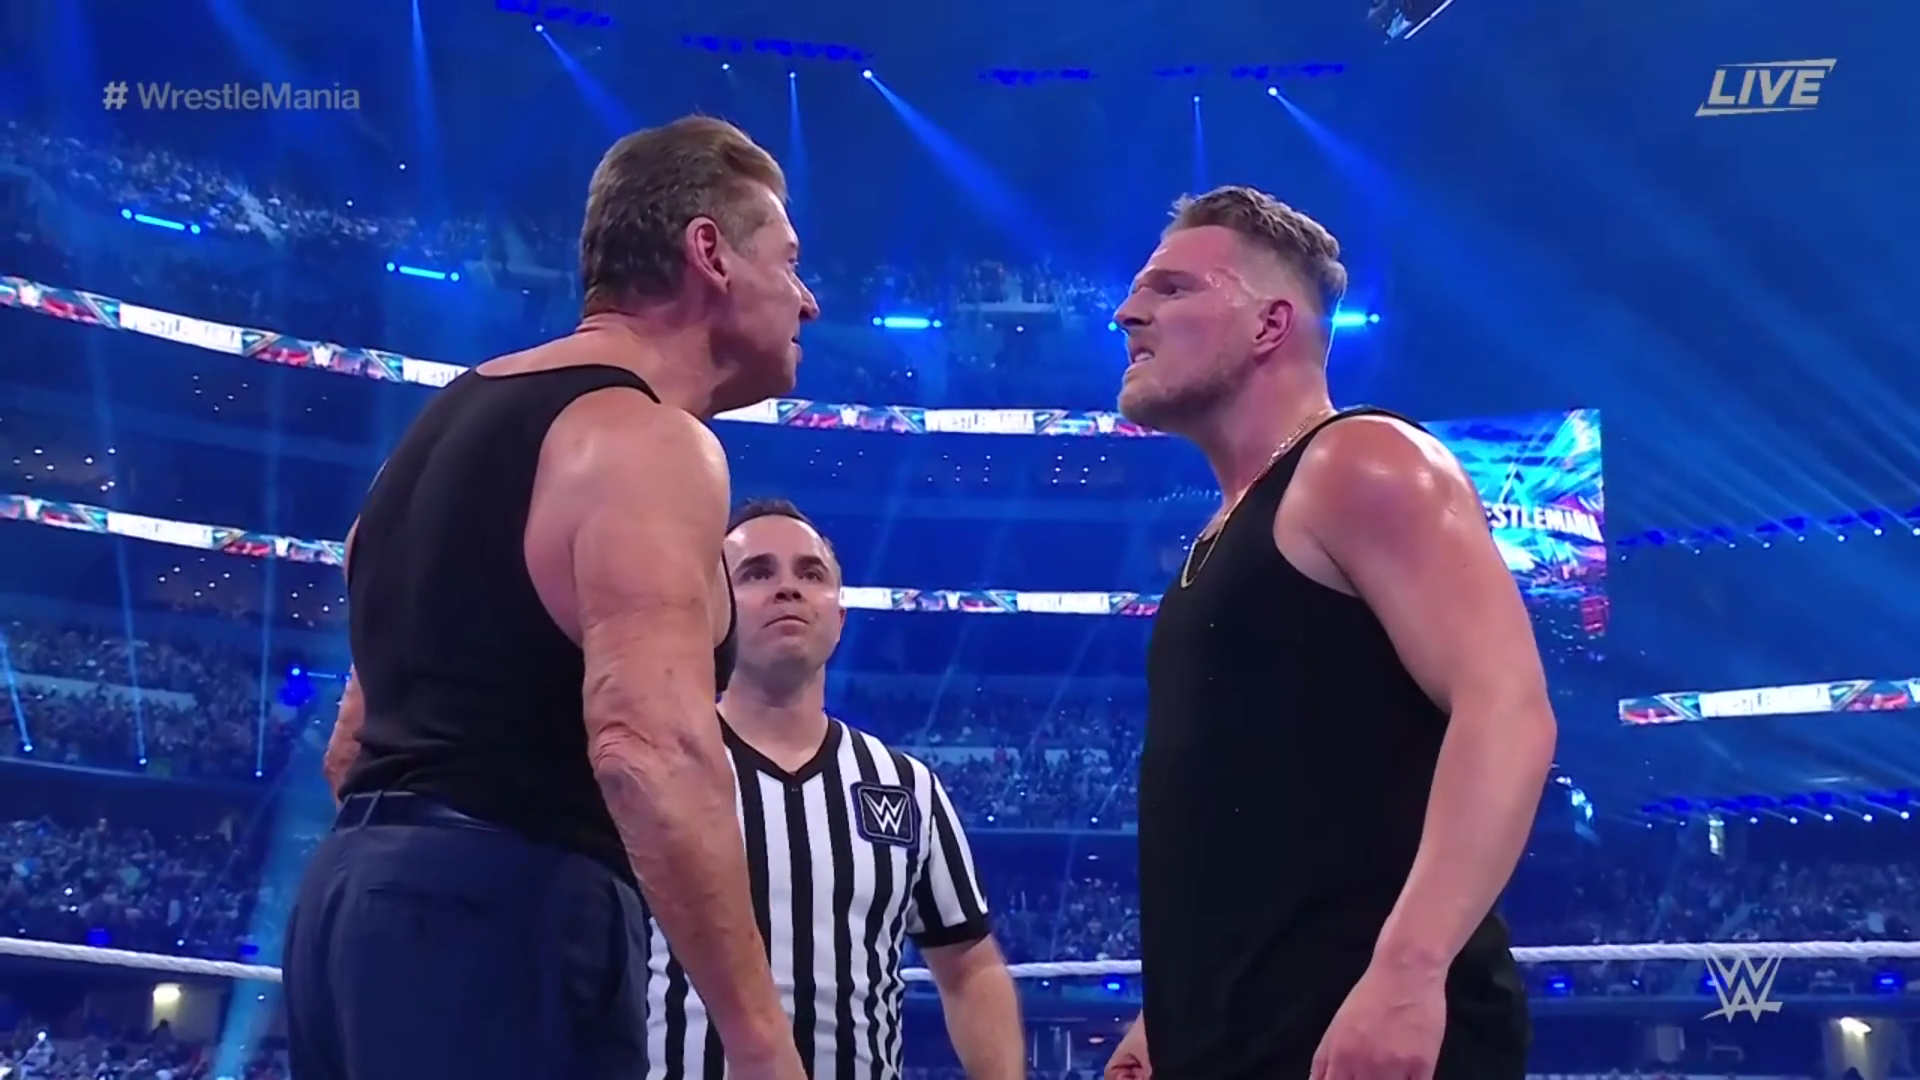 Is Vince McMahon vs Pat McAfee the Worst Wrestlemania match ever?